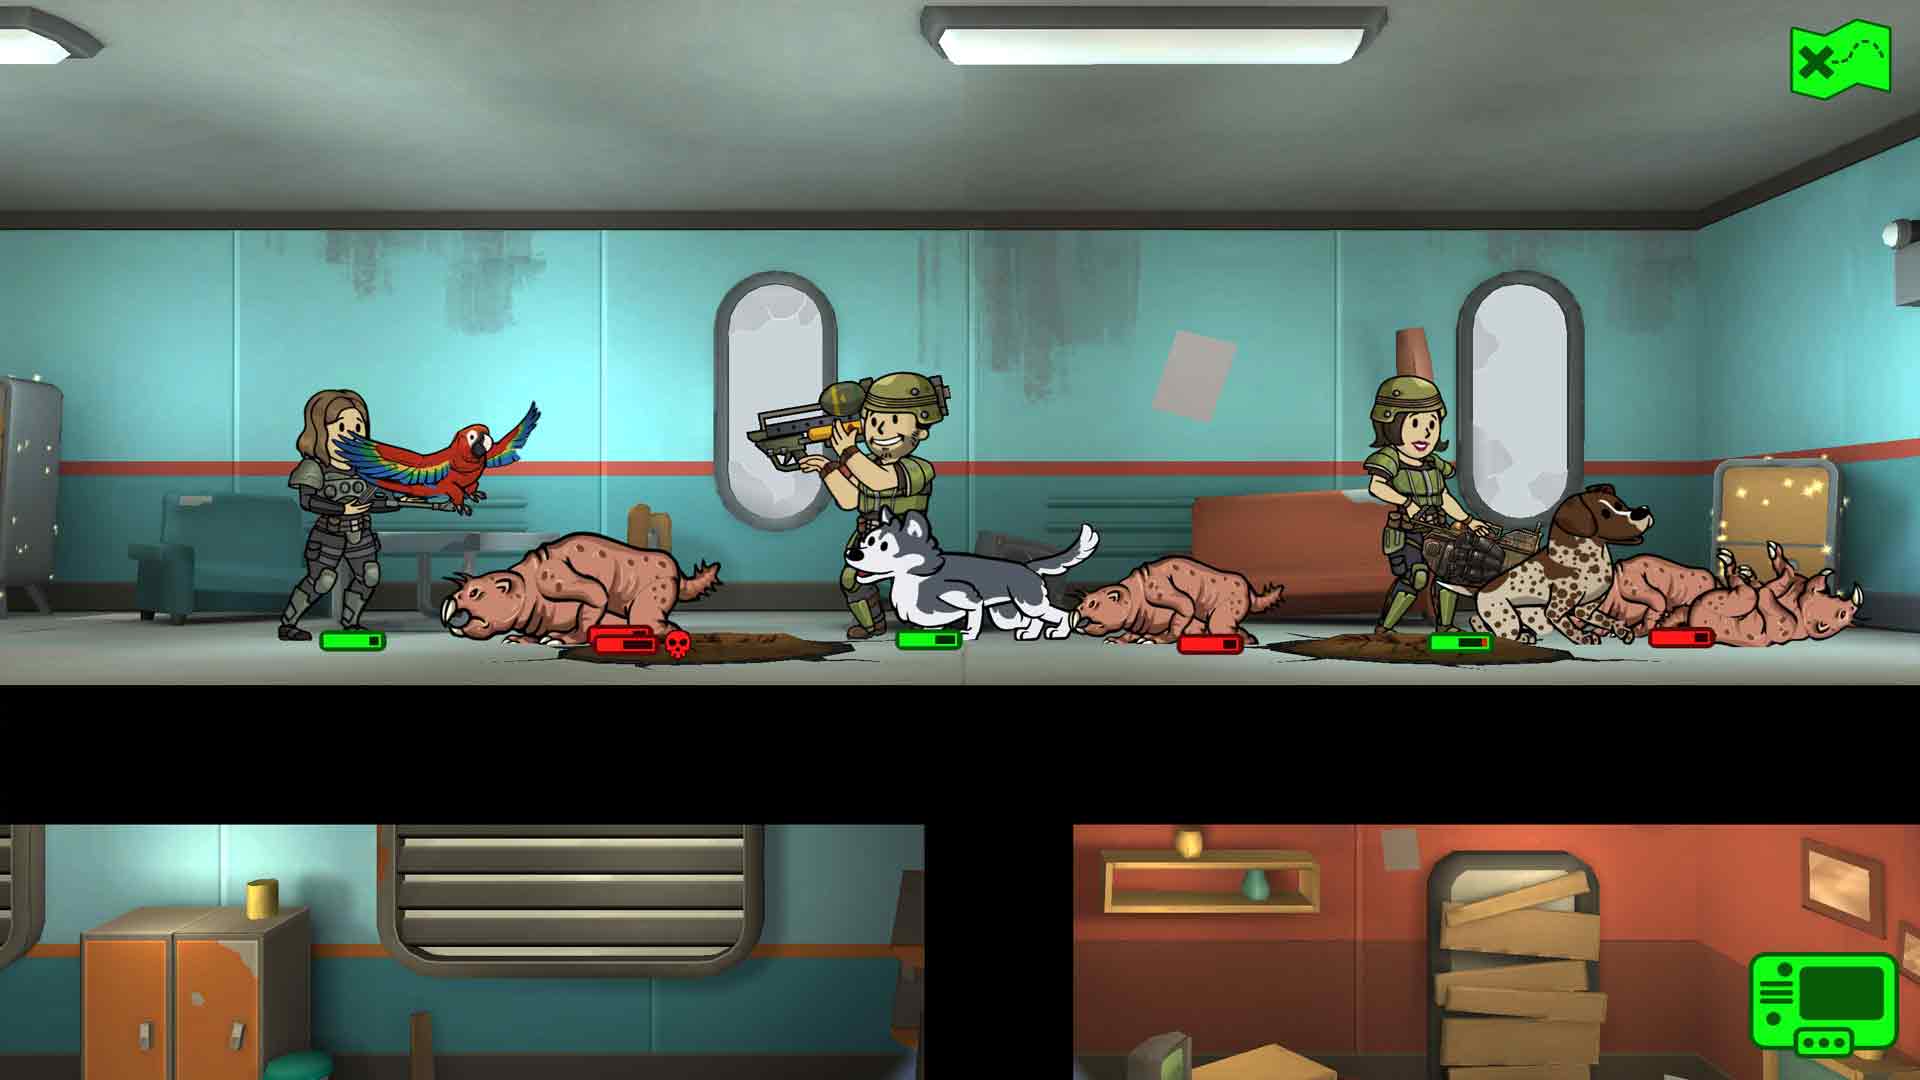 fallout shelter game show gauntlet question bank